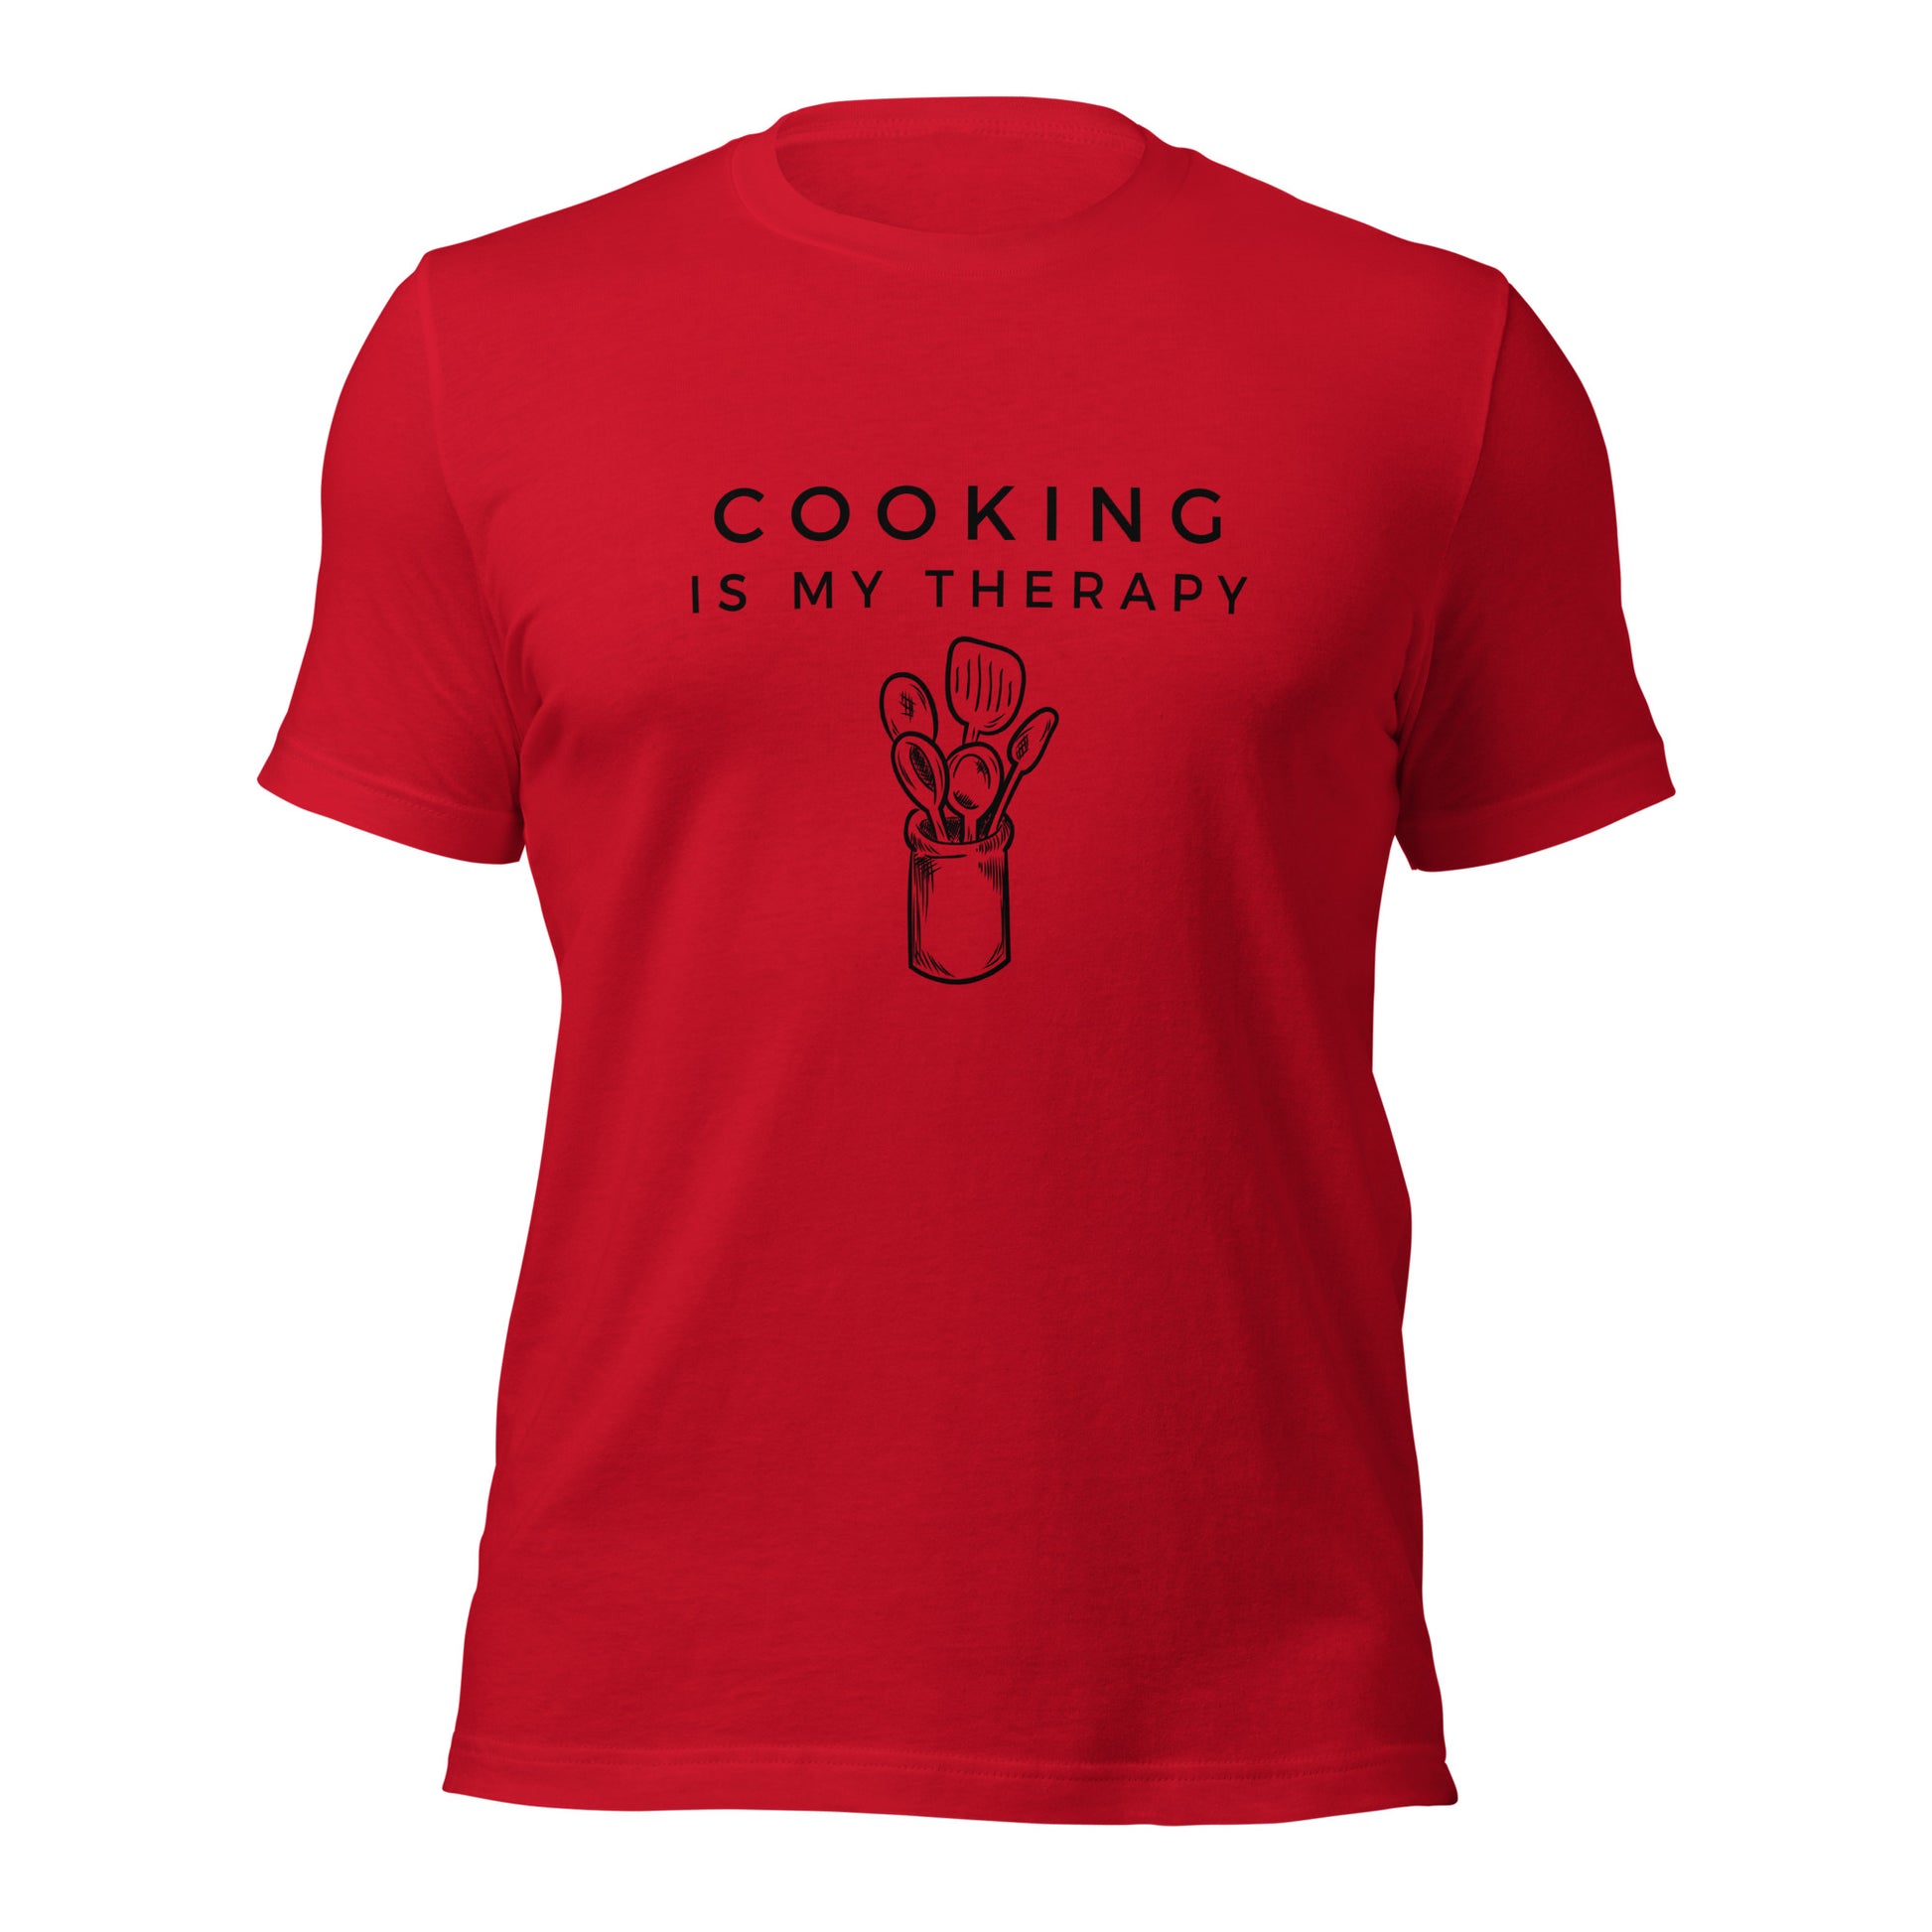 "Cooking Is My Therapy" culinary enthusiast t-shirt